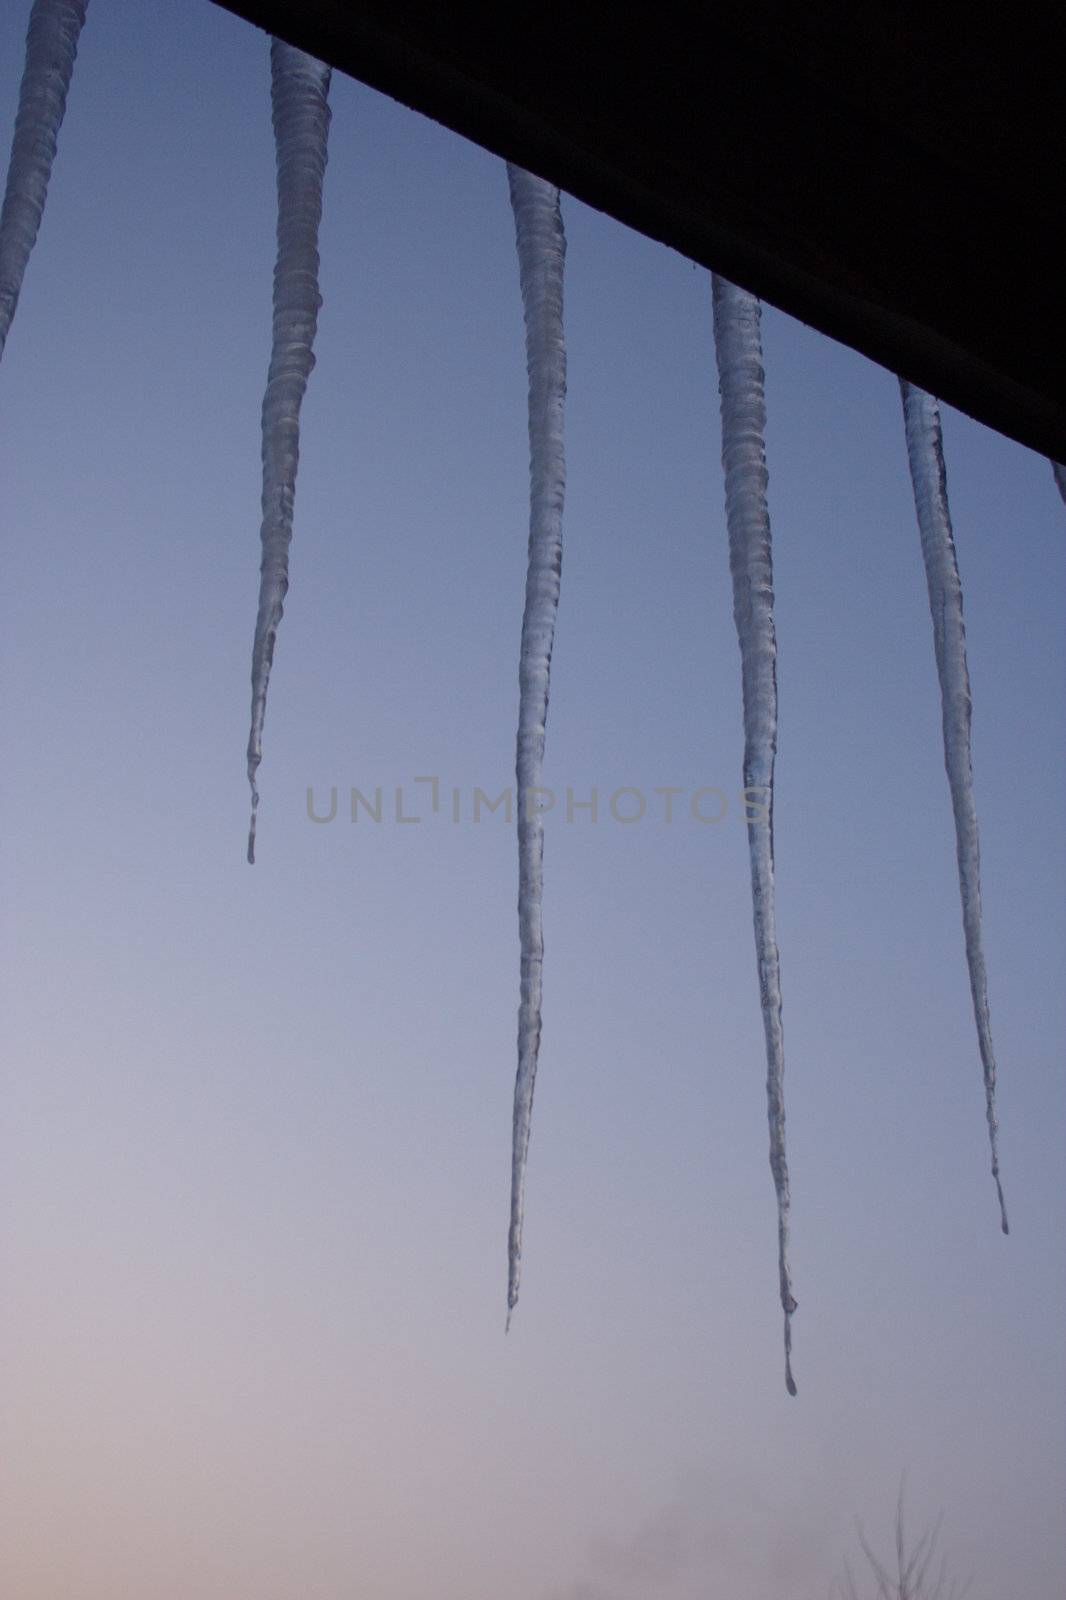 icicles by noah1974